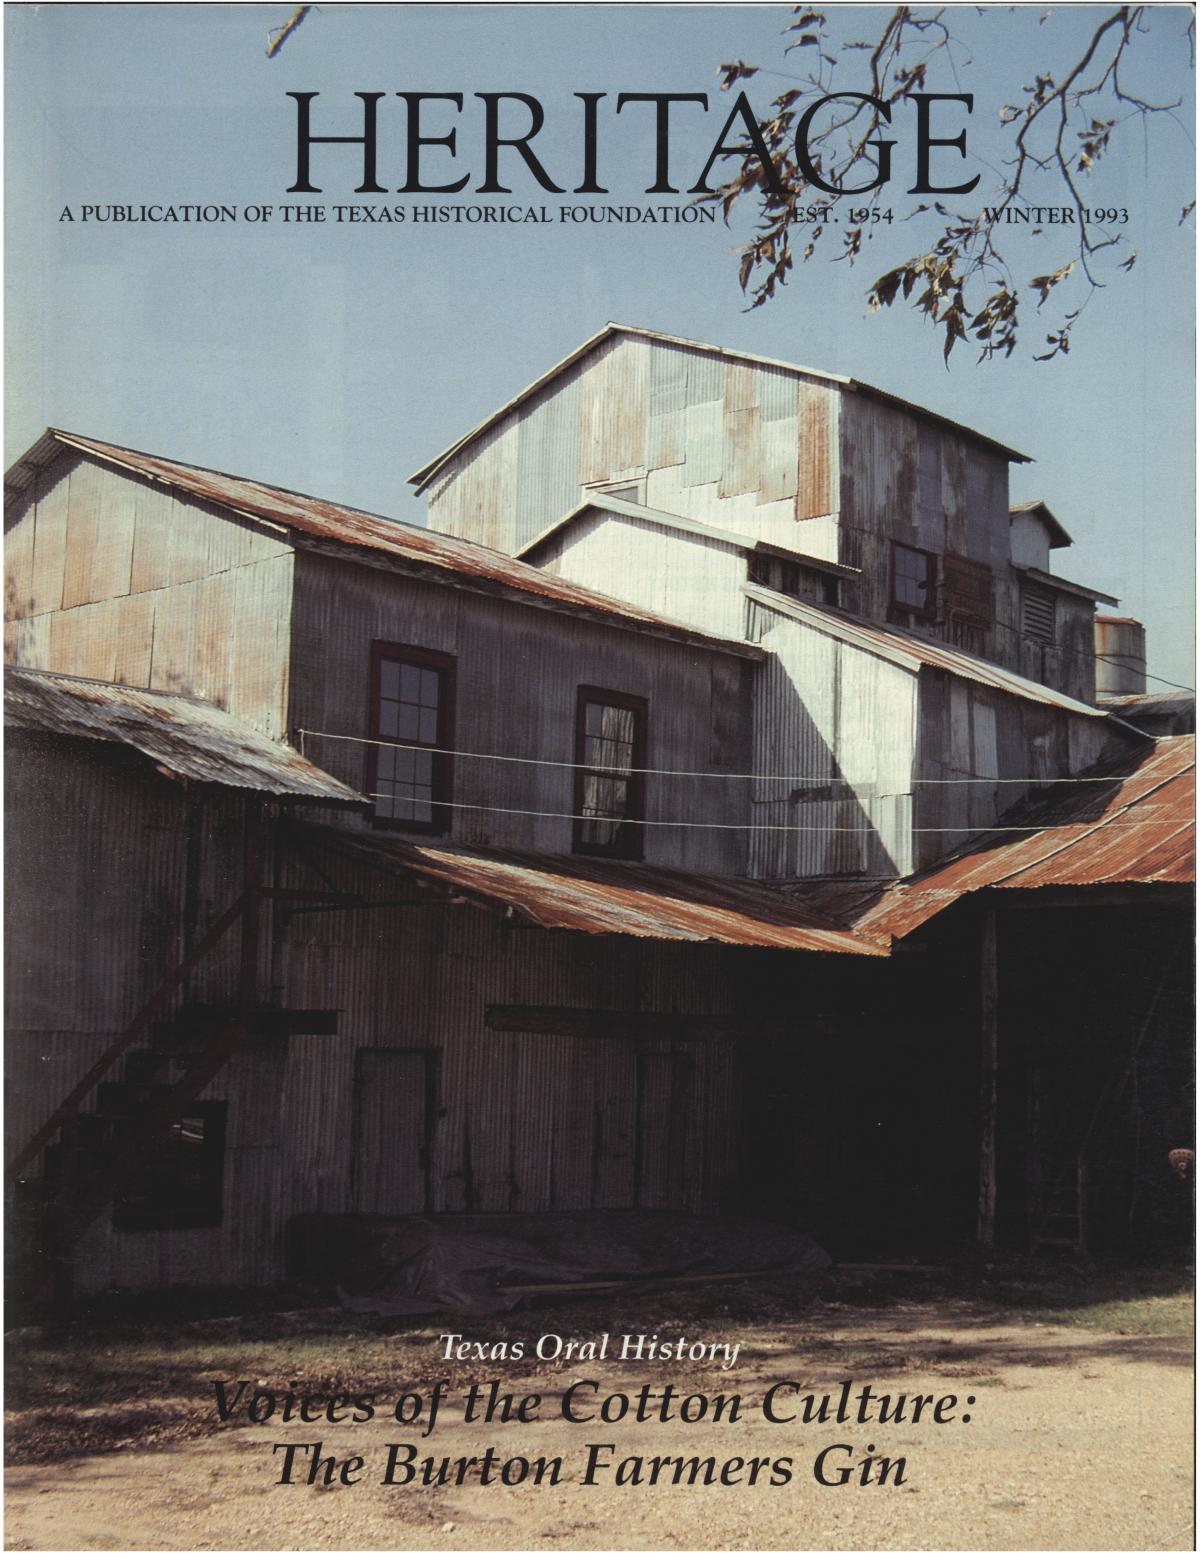 Heritage, Volume 11, Number 1, Winter 1993
                                                
                                                    Front Cover
                                                